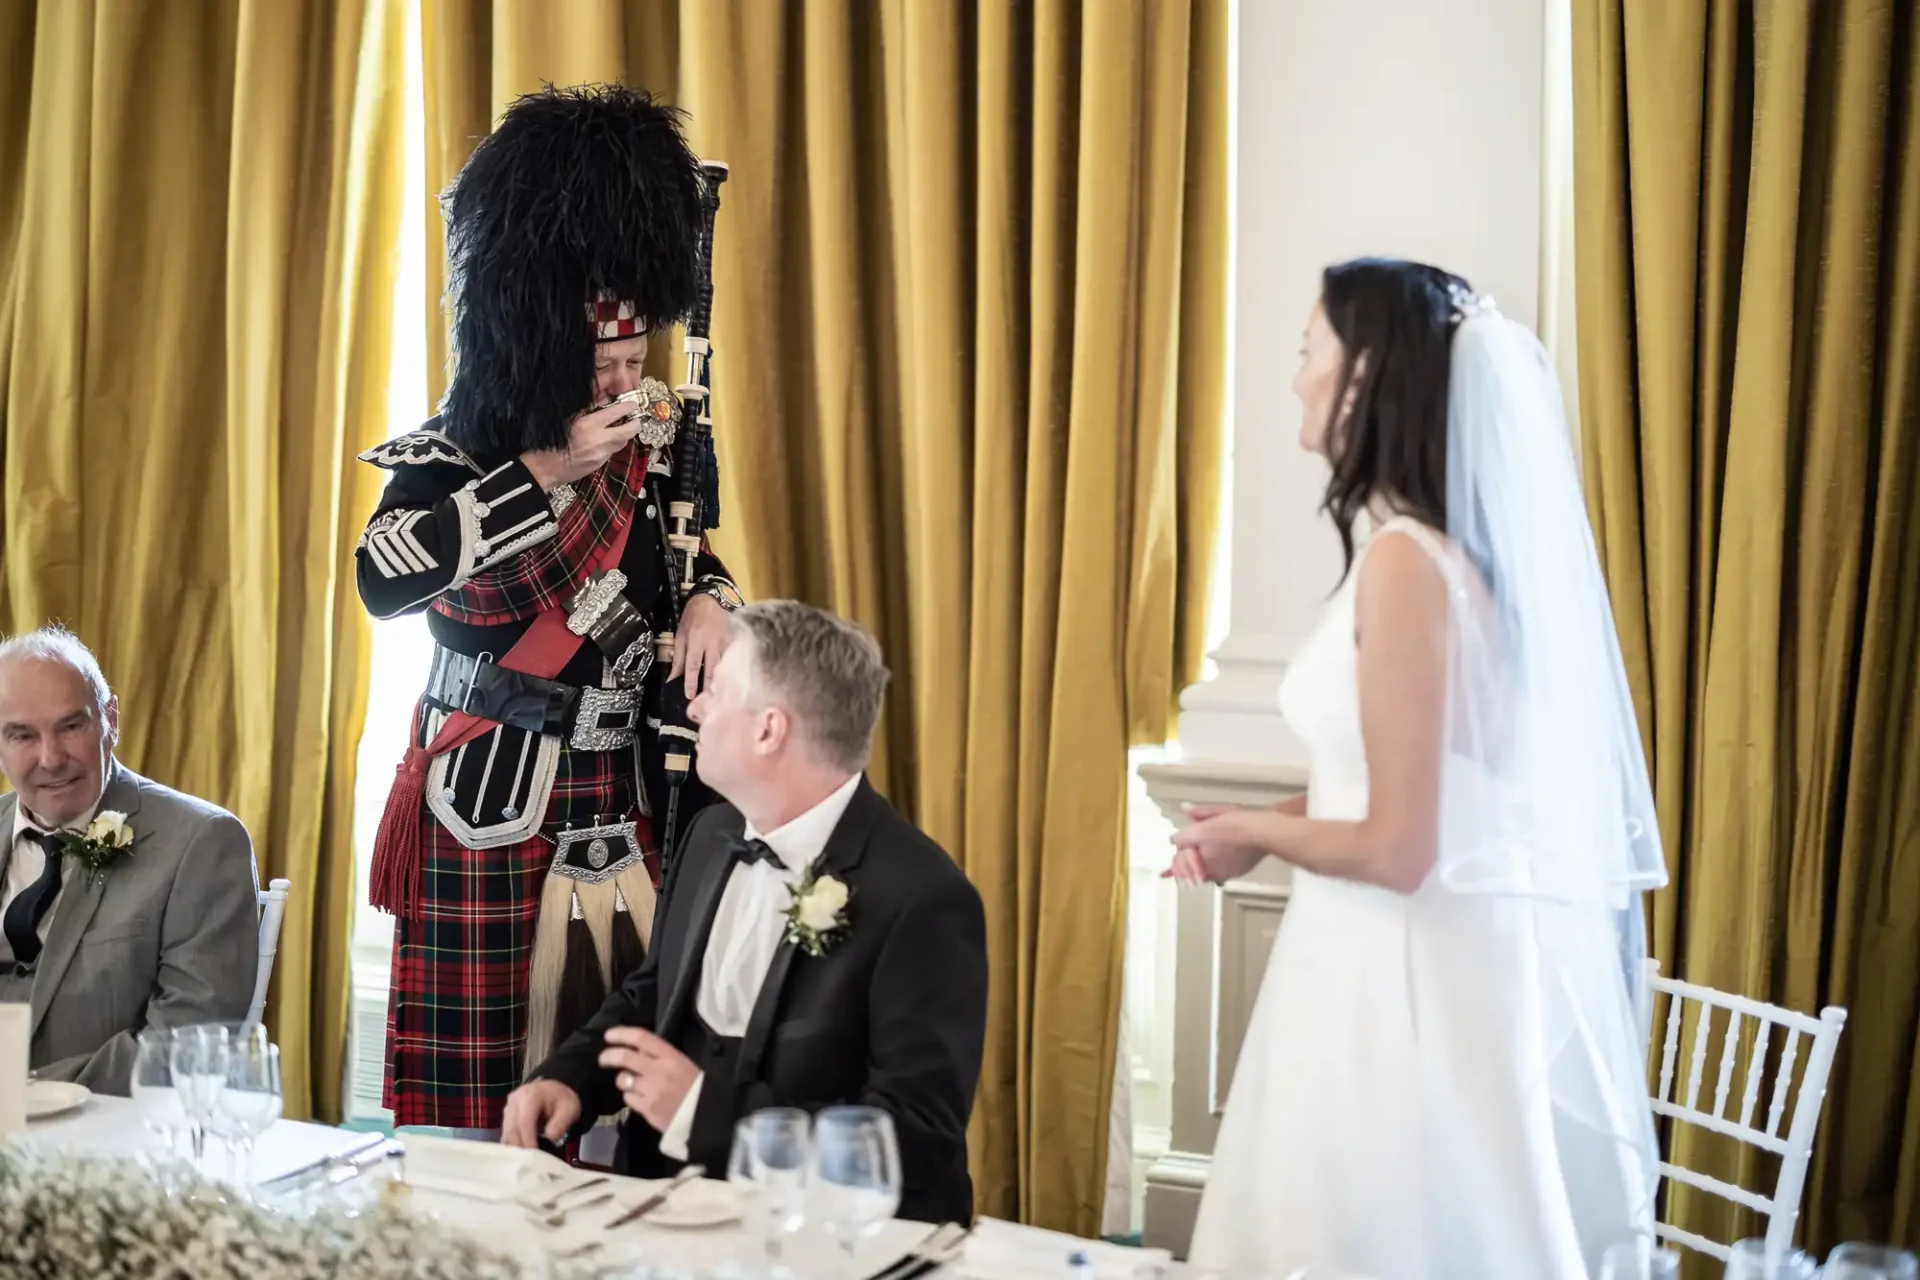 A bagpiper in traditional scottish attire plays at a wedding reception, entertaining a smiling bride and groom seated at a table.